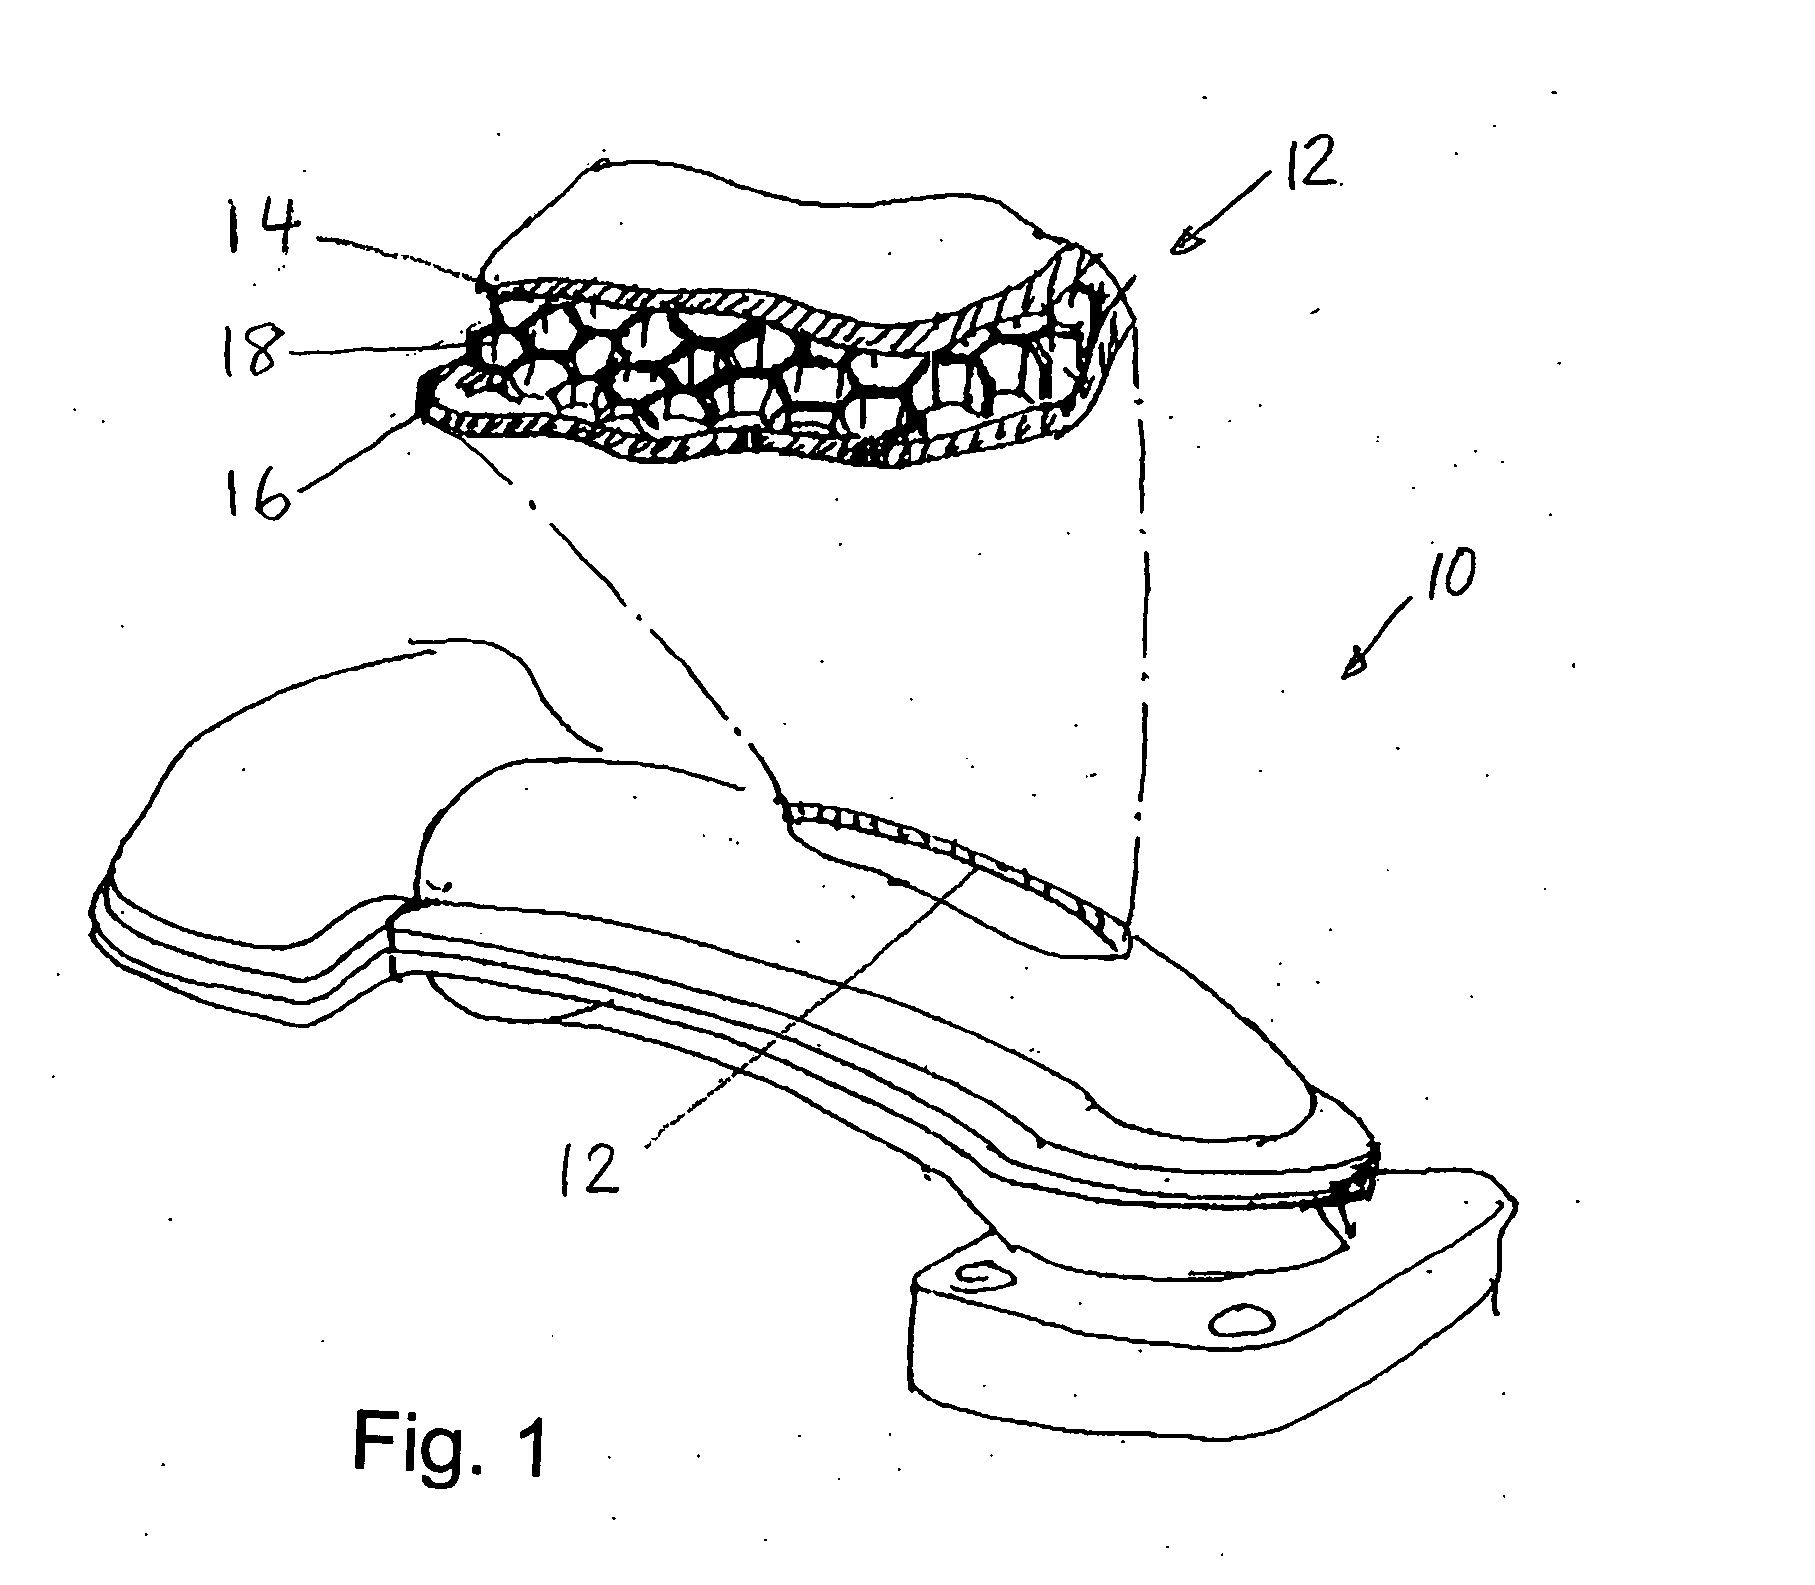 Engine component having a honeycomb structure